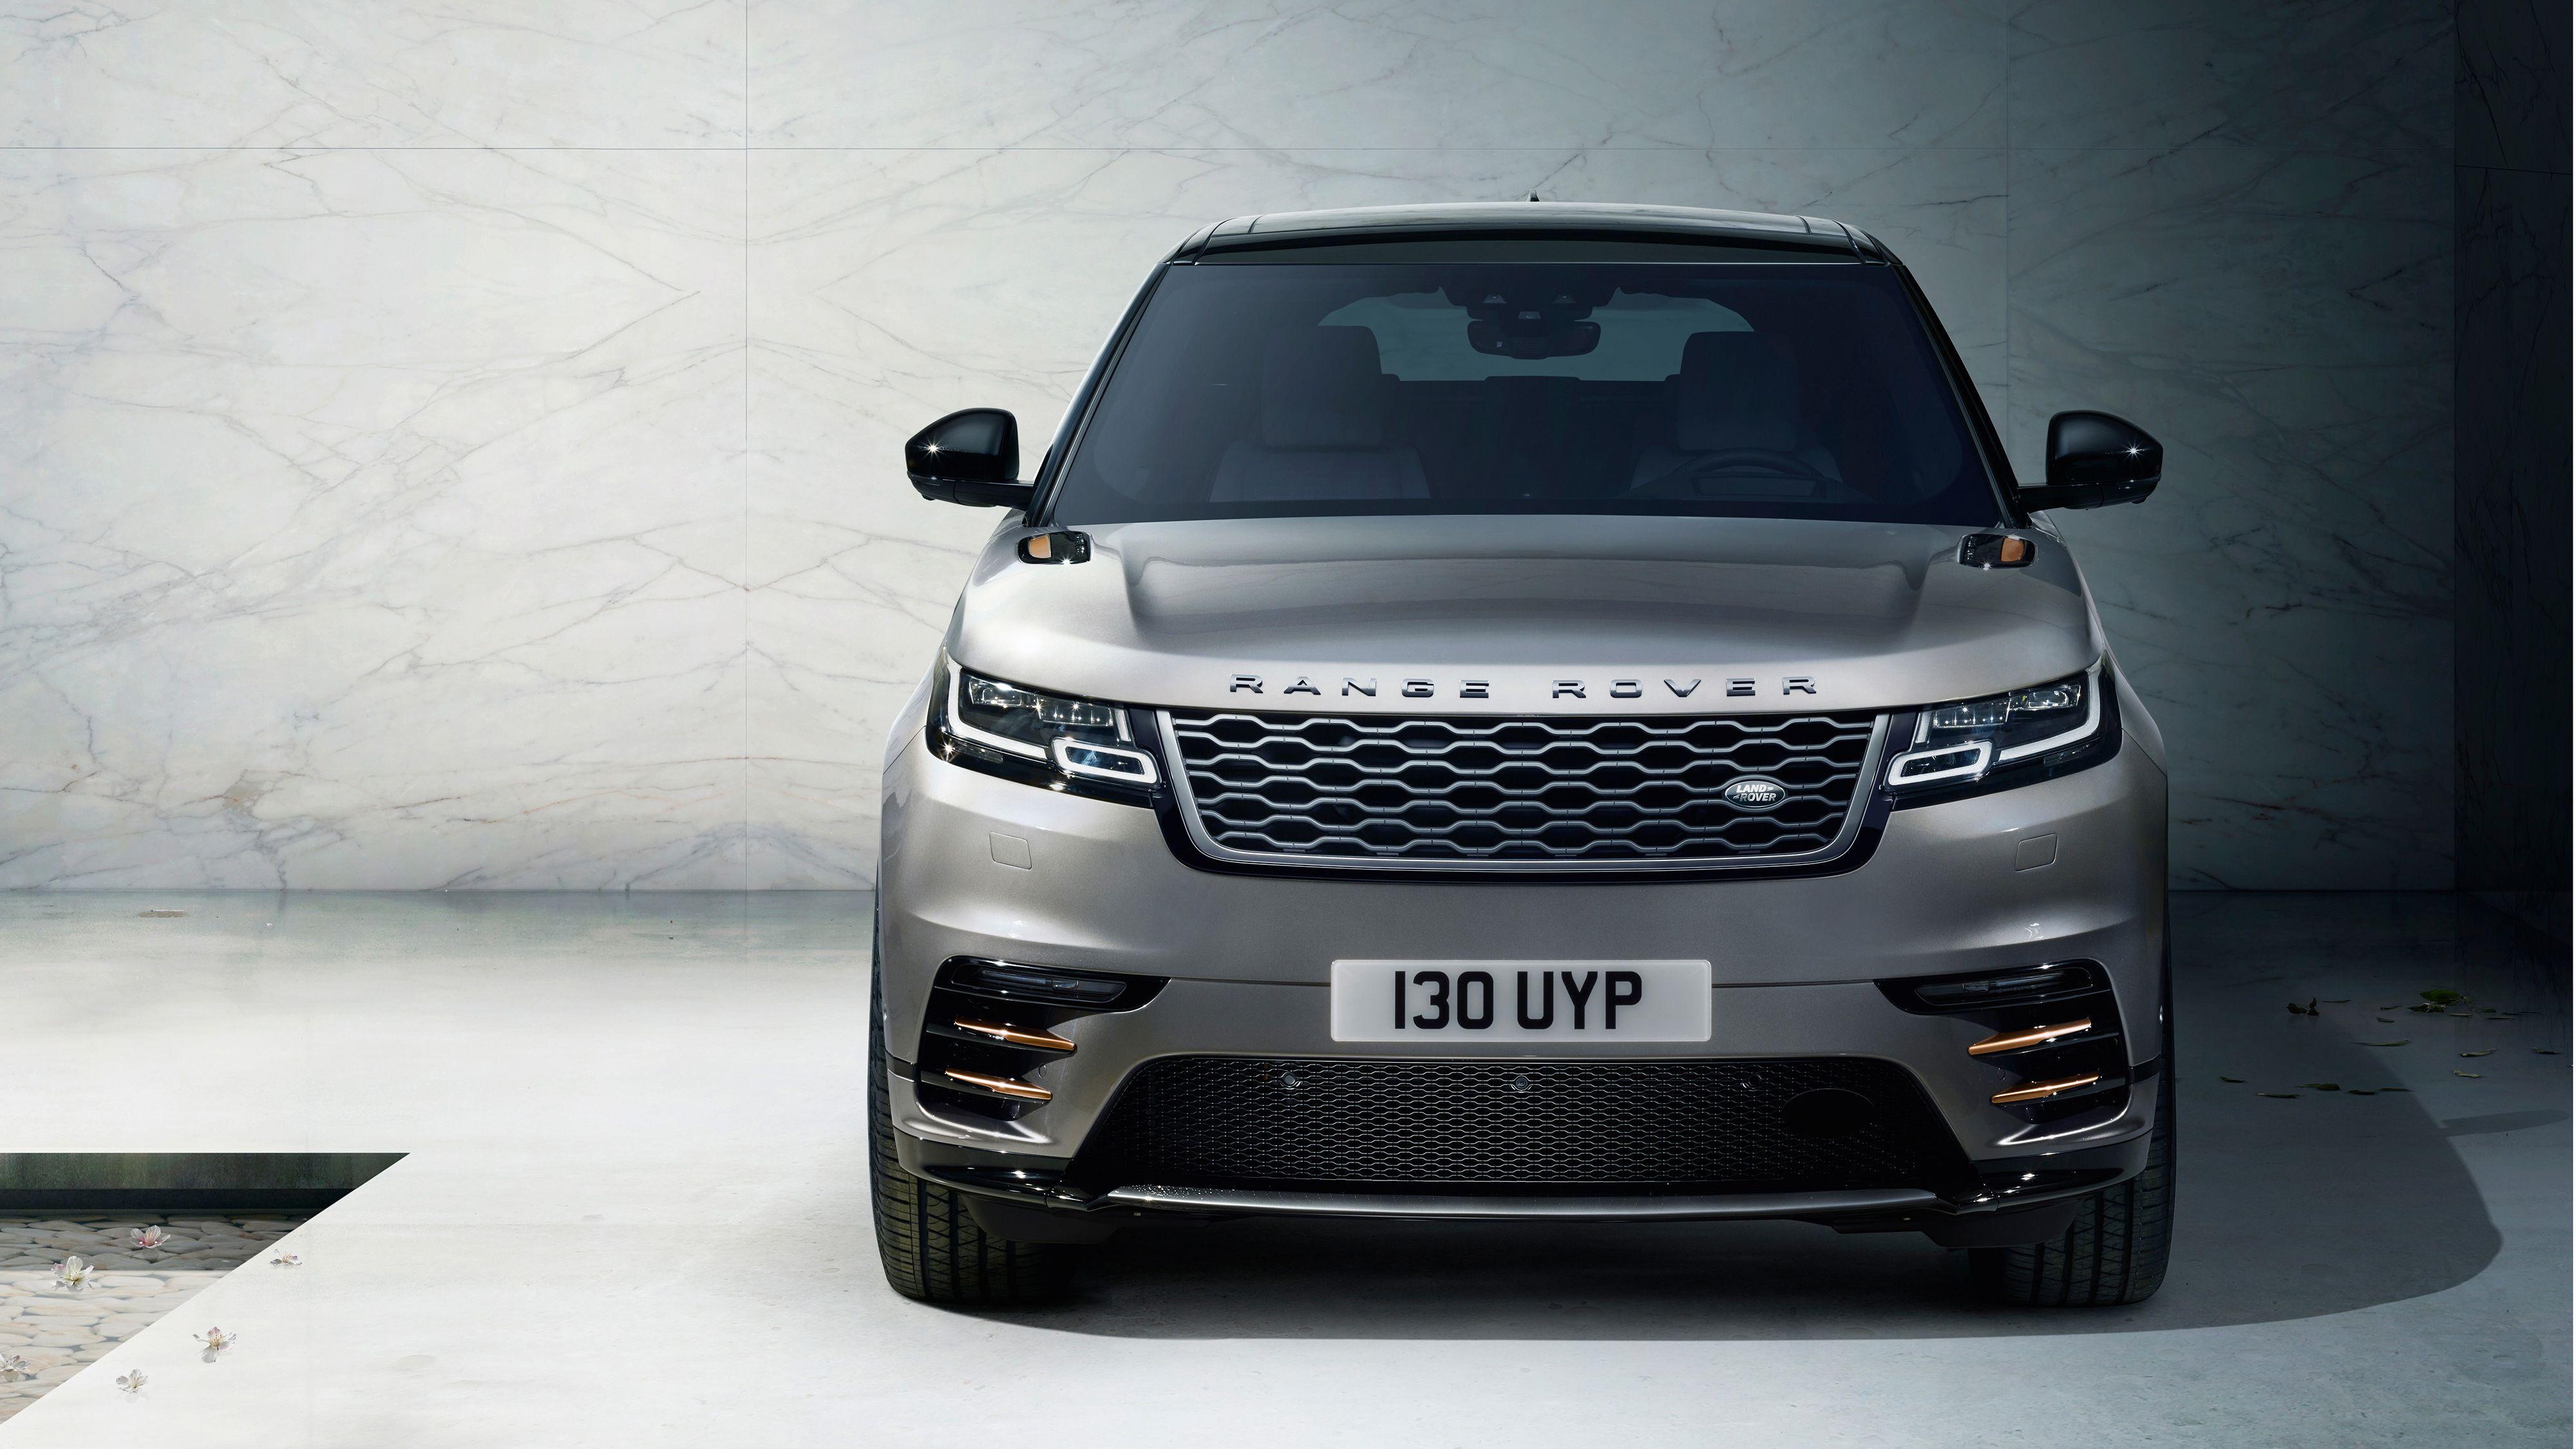 Land Rover Car Wallpaper, Picture. Land Rover Widescreen & HD